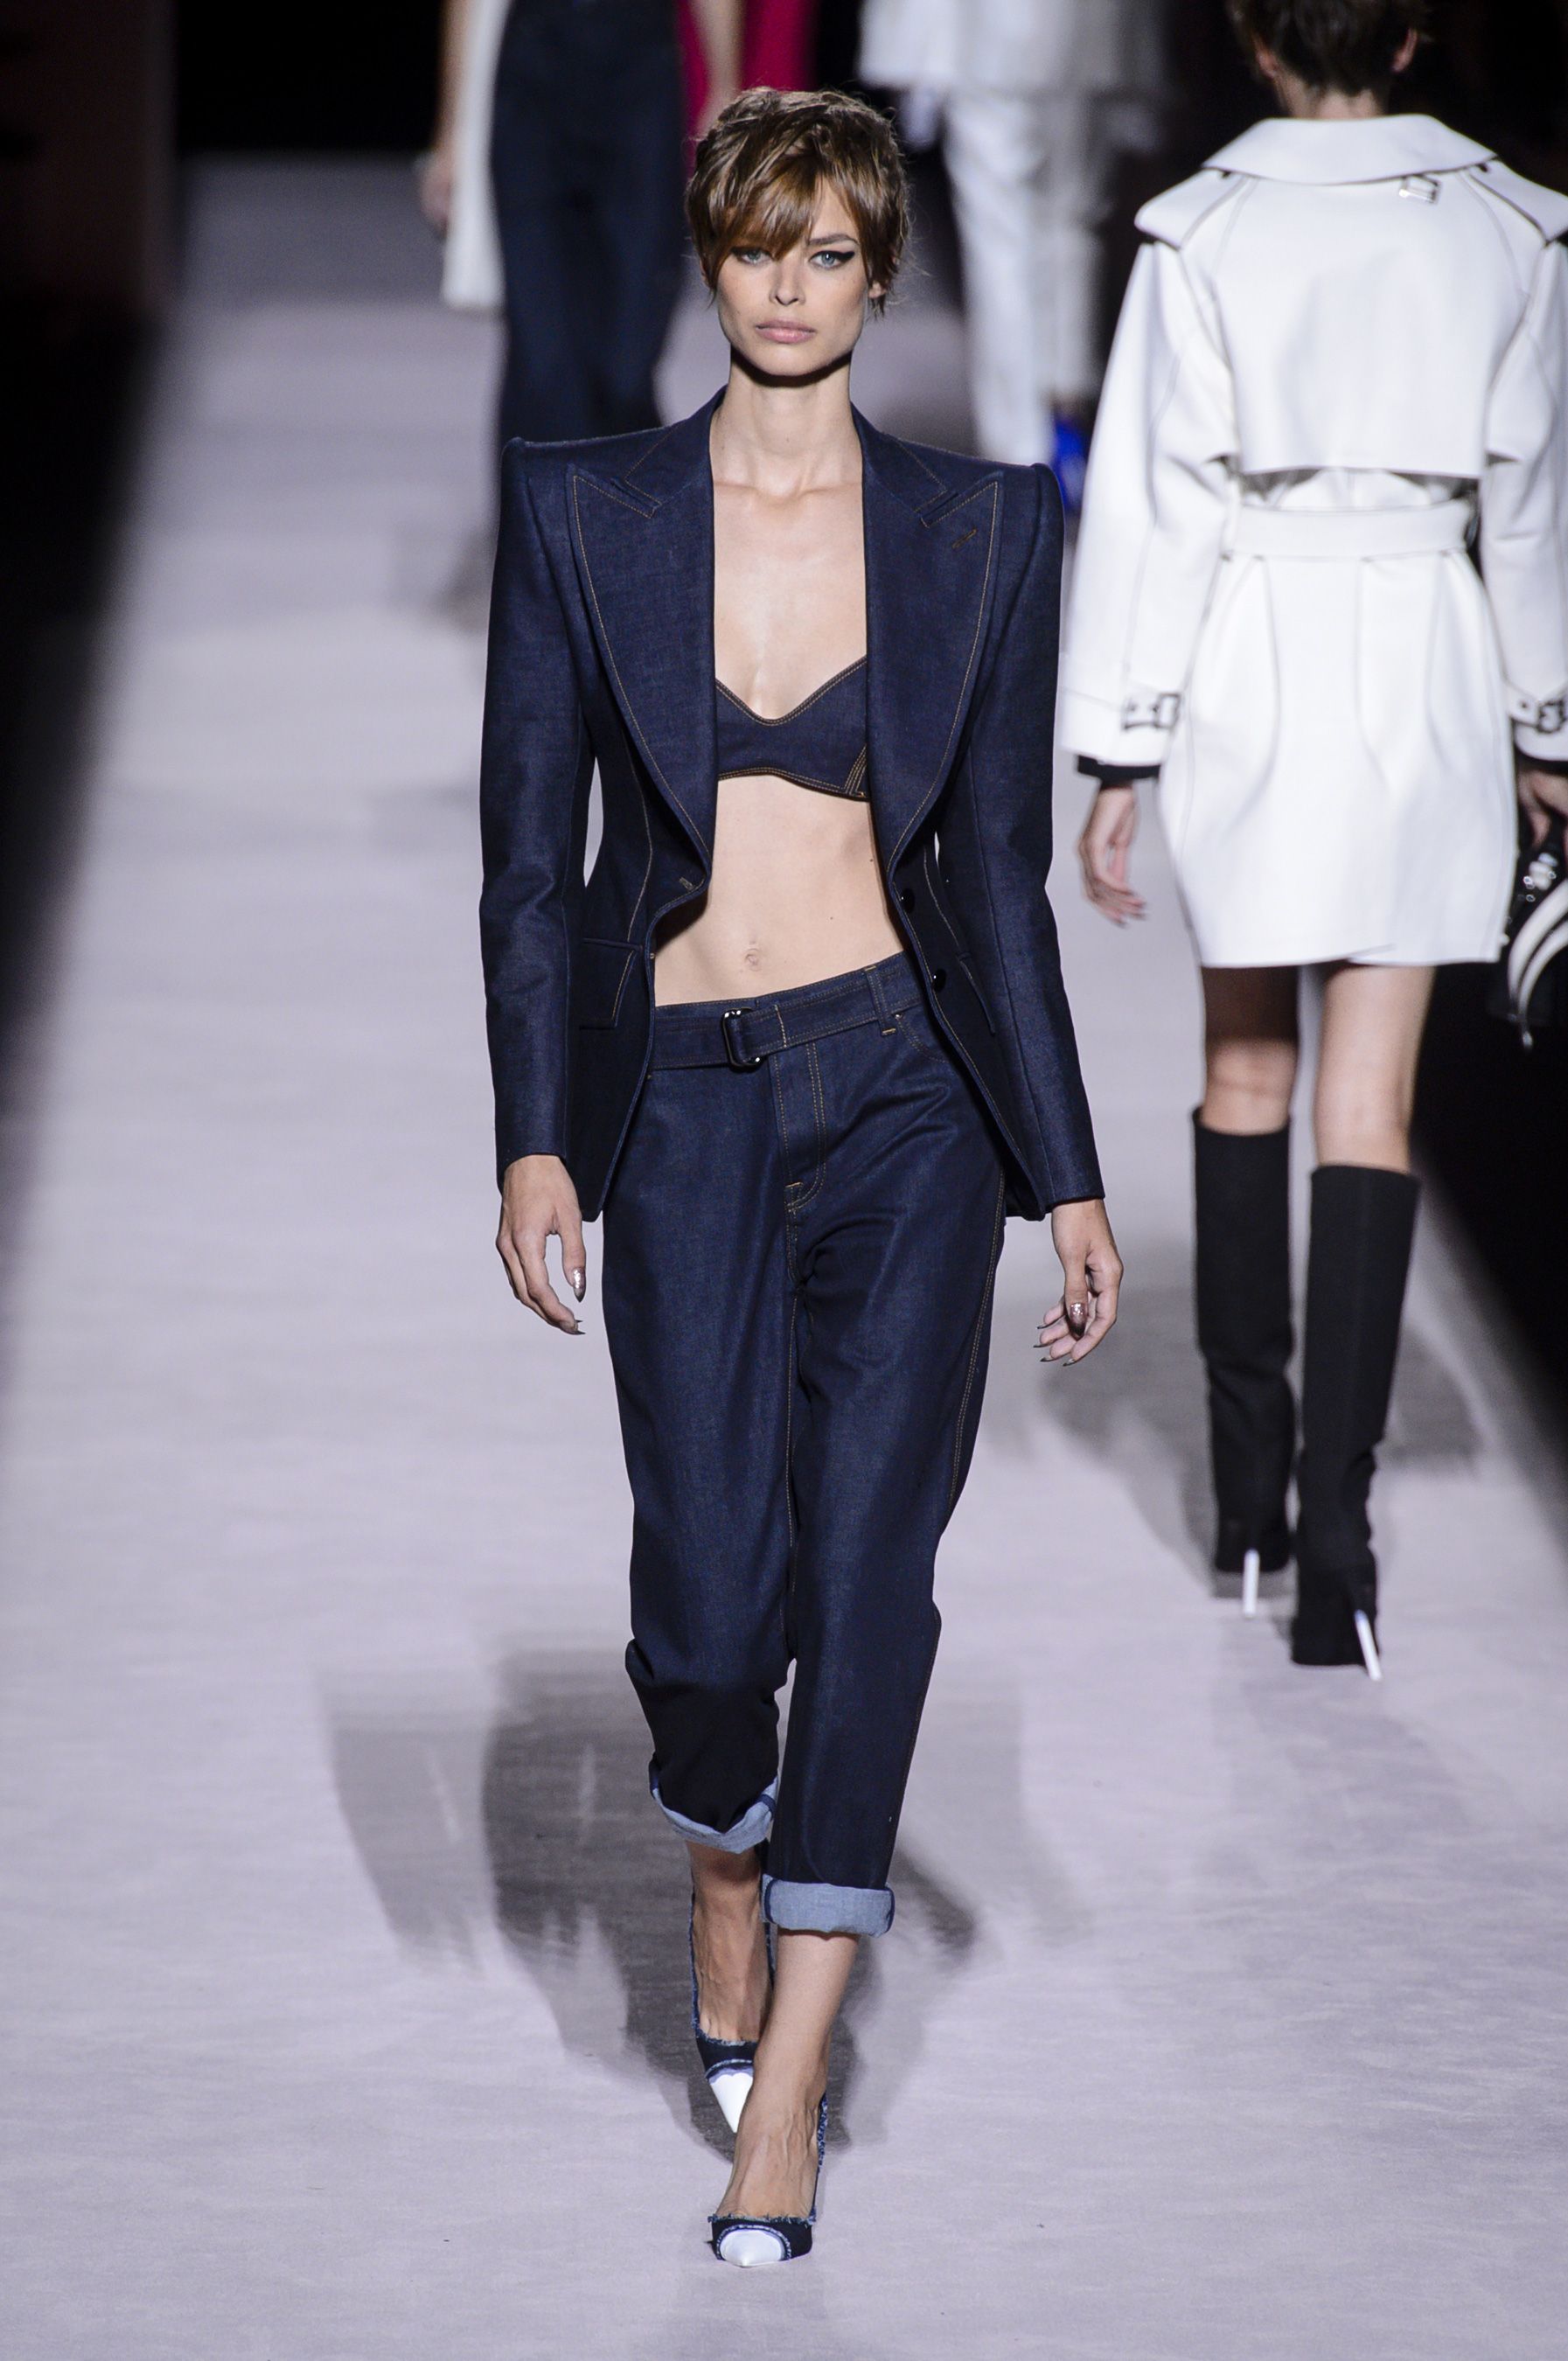 Tom Ford SS18 Runway Show - Tom Ford Collection Fashion Week Spring 2018